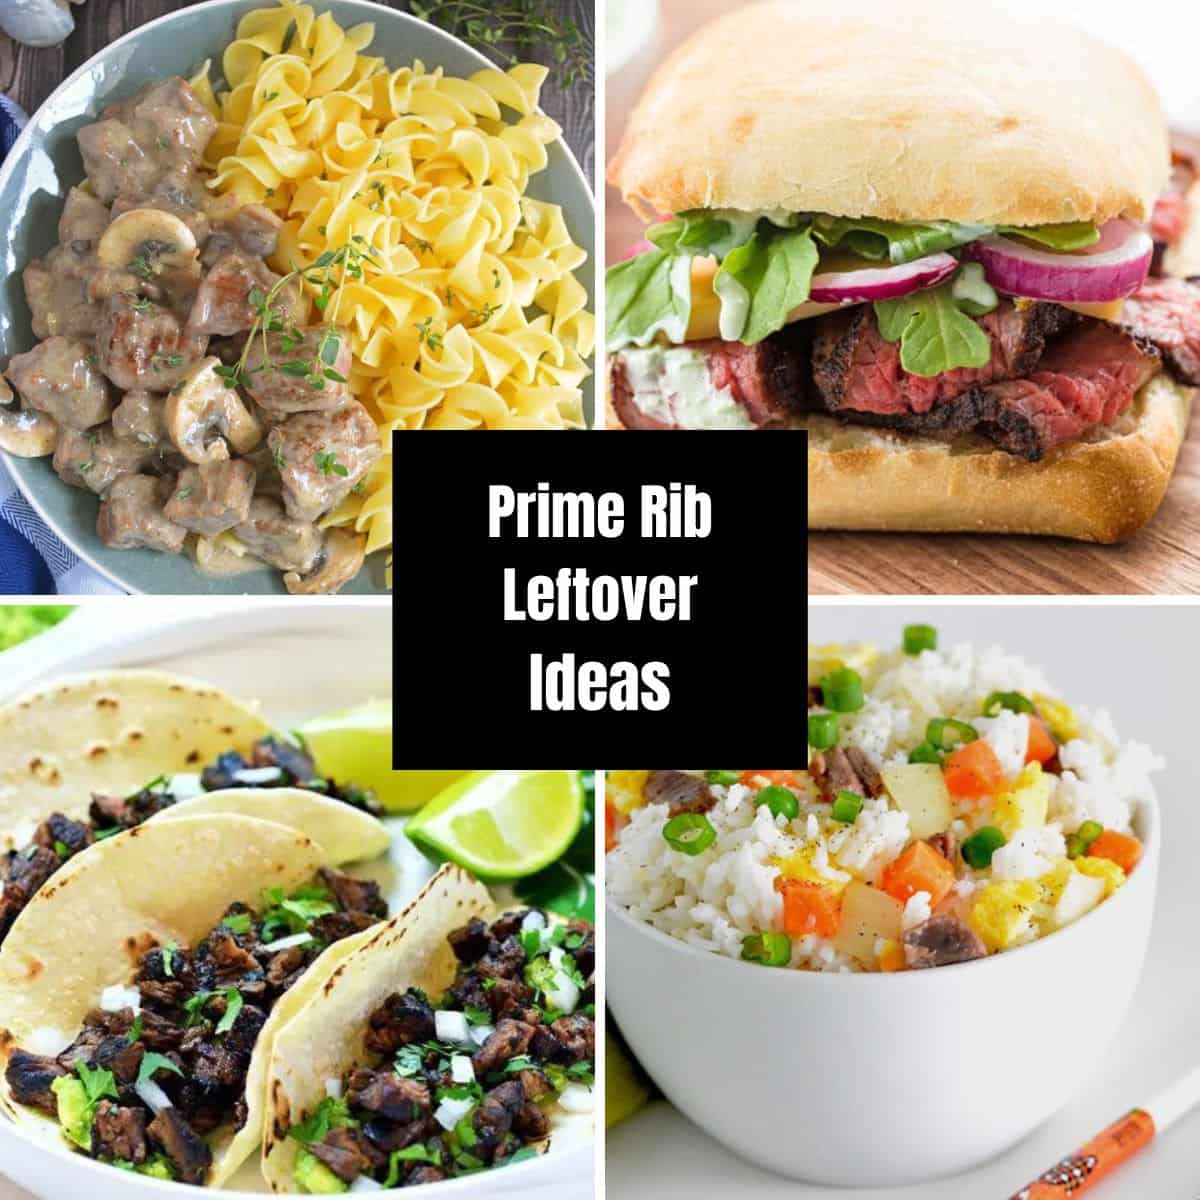 4 visuals showing various beef recipes. Text says "prime rib leftover ideas".